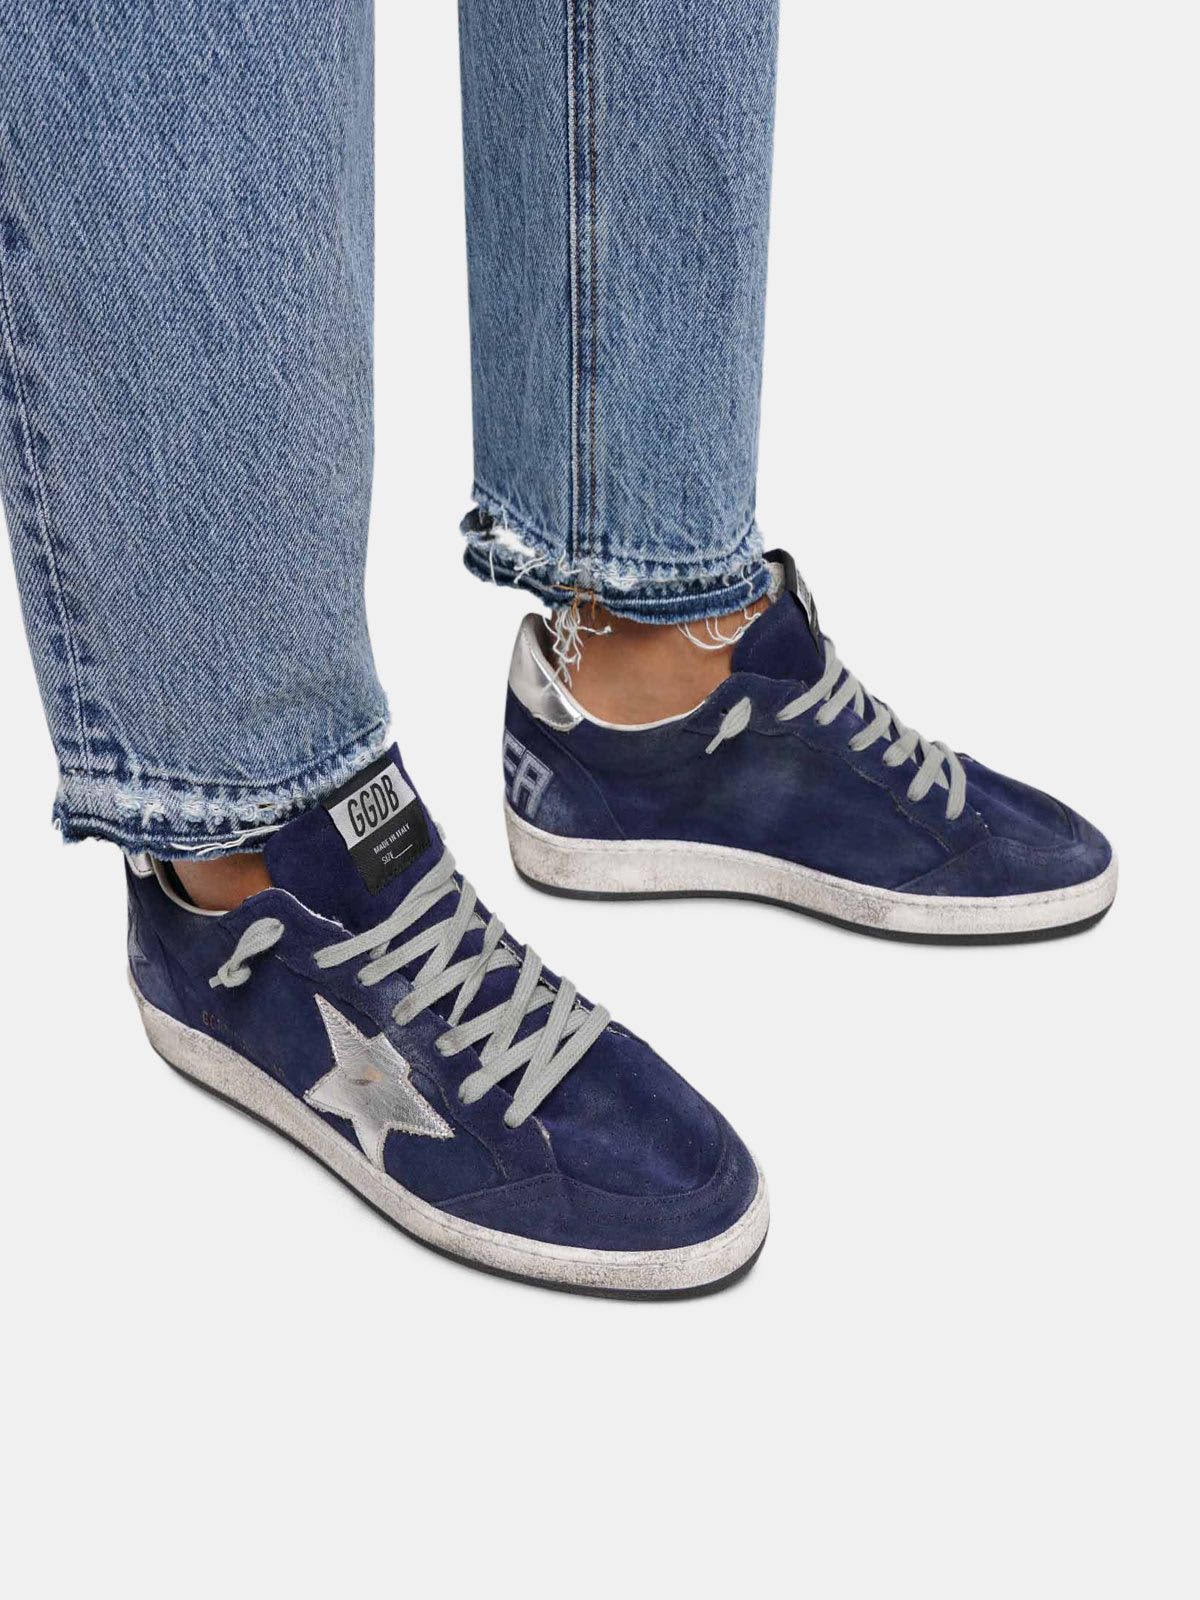 Ball Star sneakers in navy blue suede with silver star